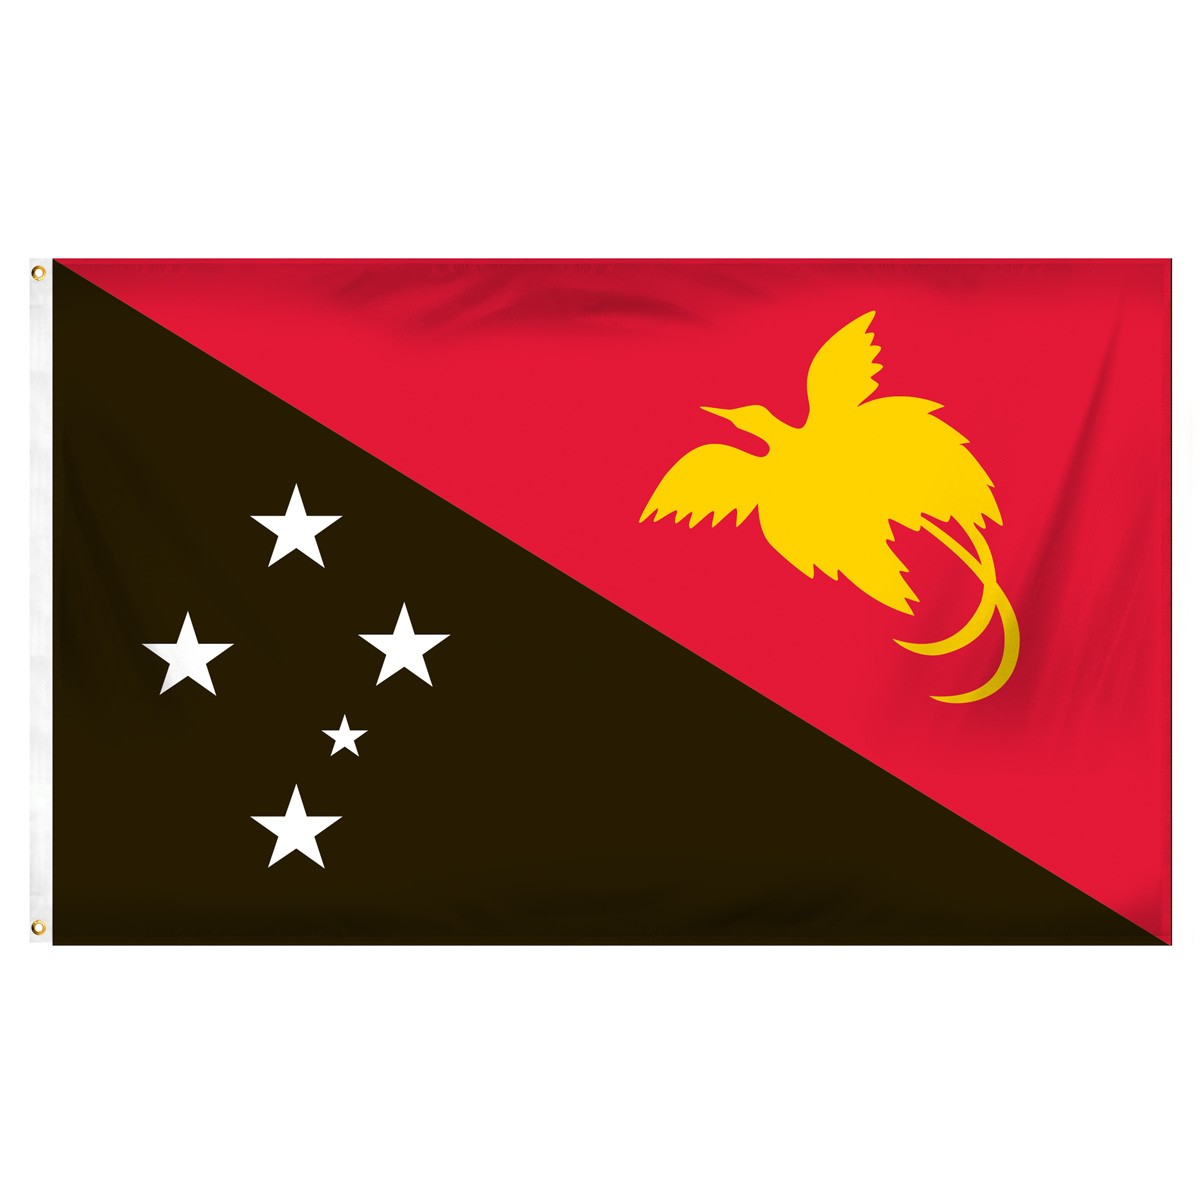 Papua New Guinea Building Pennants and Flags